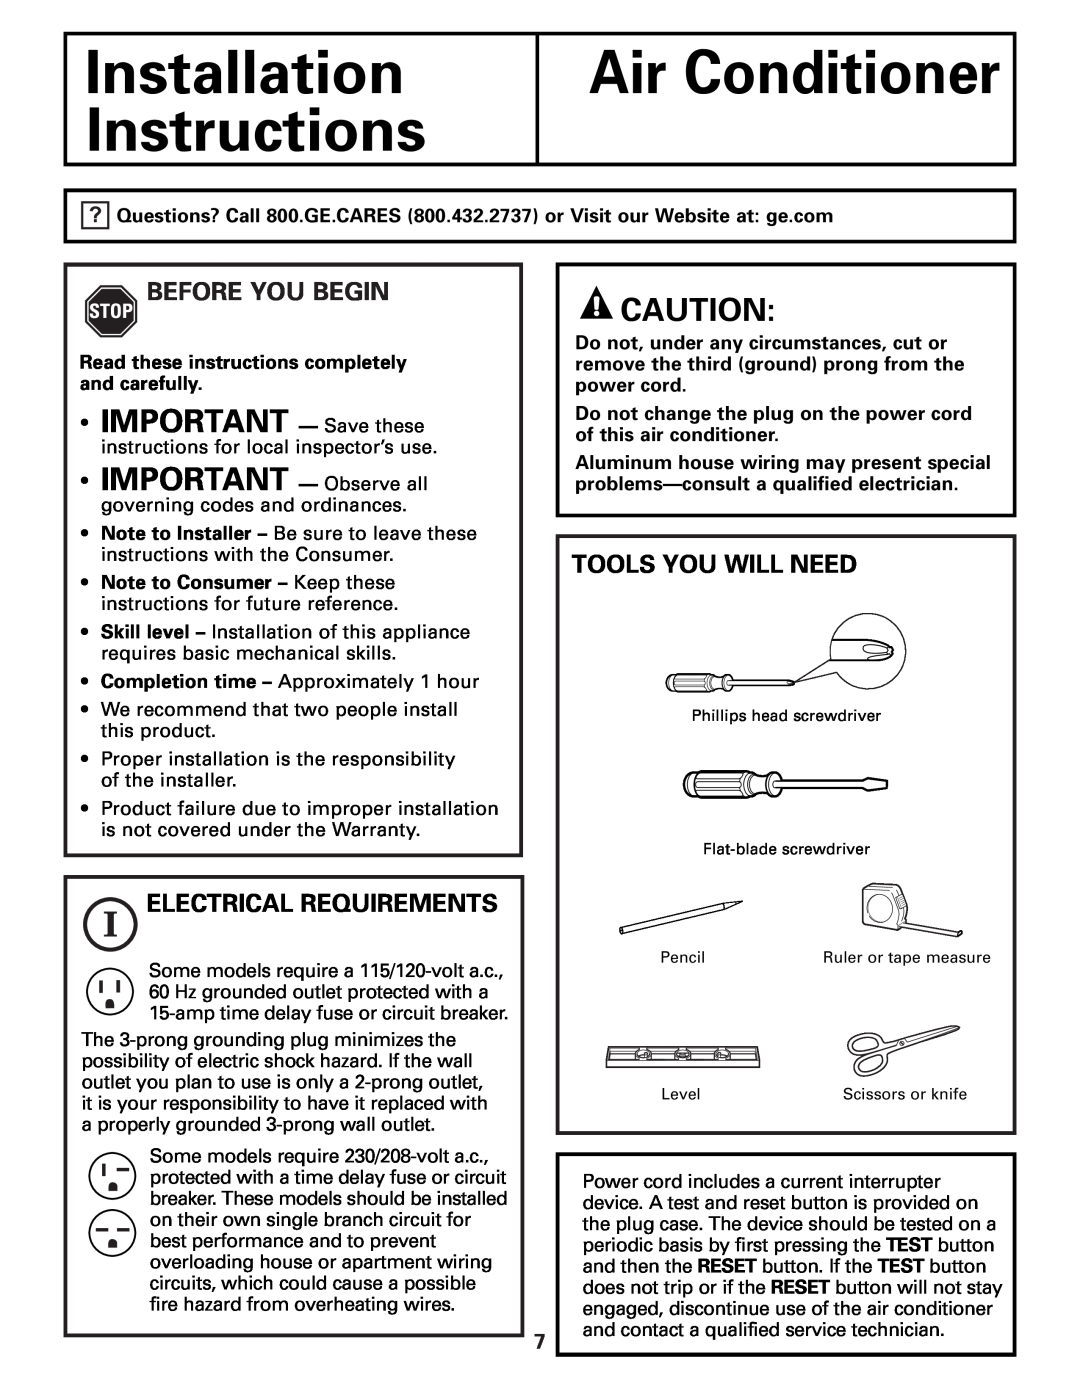 GE AGH18 Installation Instructions, Air Conditioner, IMPORTANT - Save these, Before You Begin, Electrical Requirements 